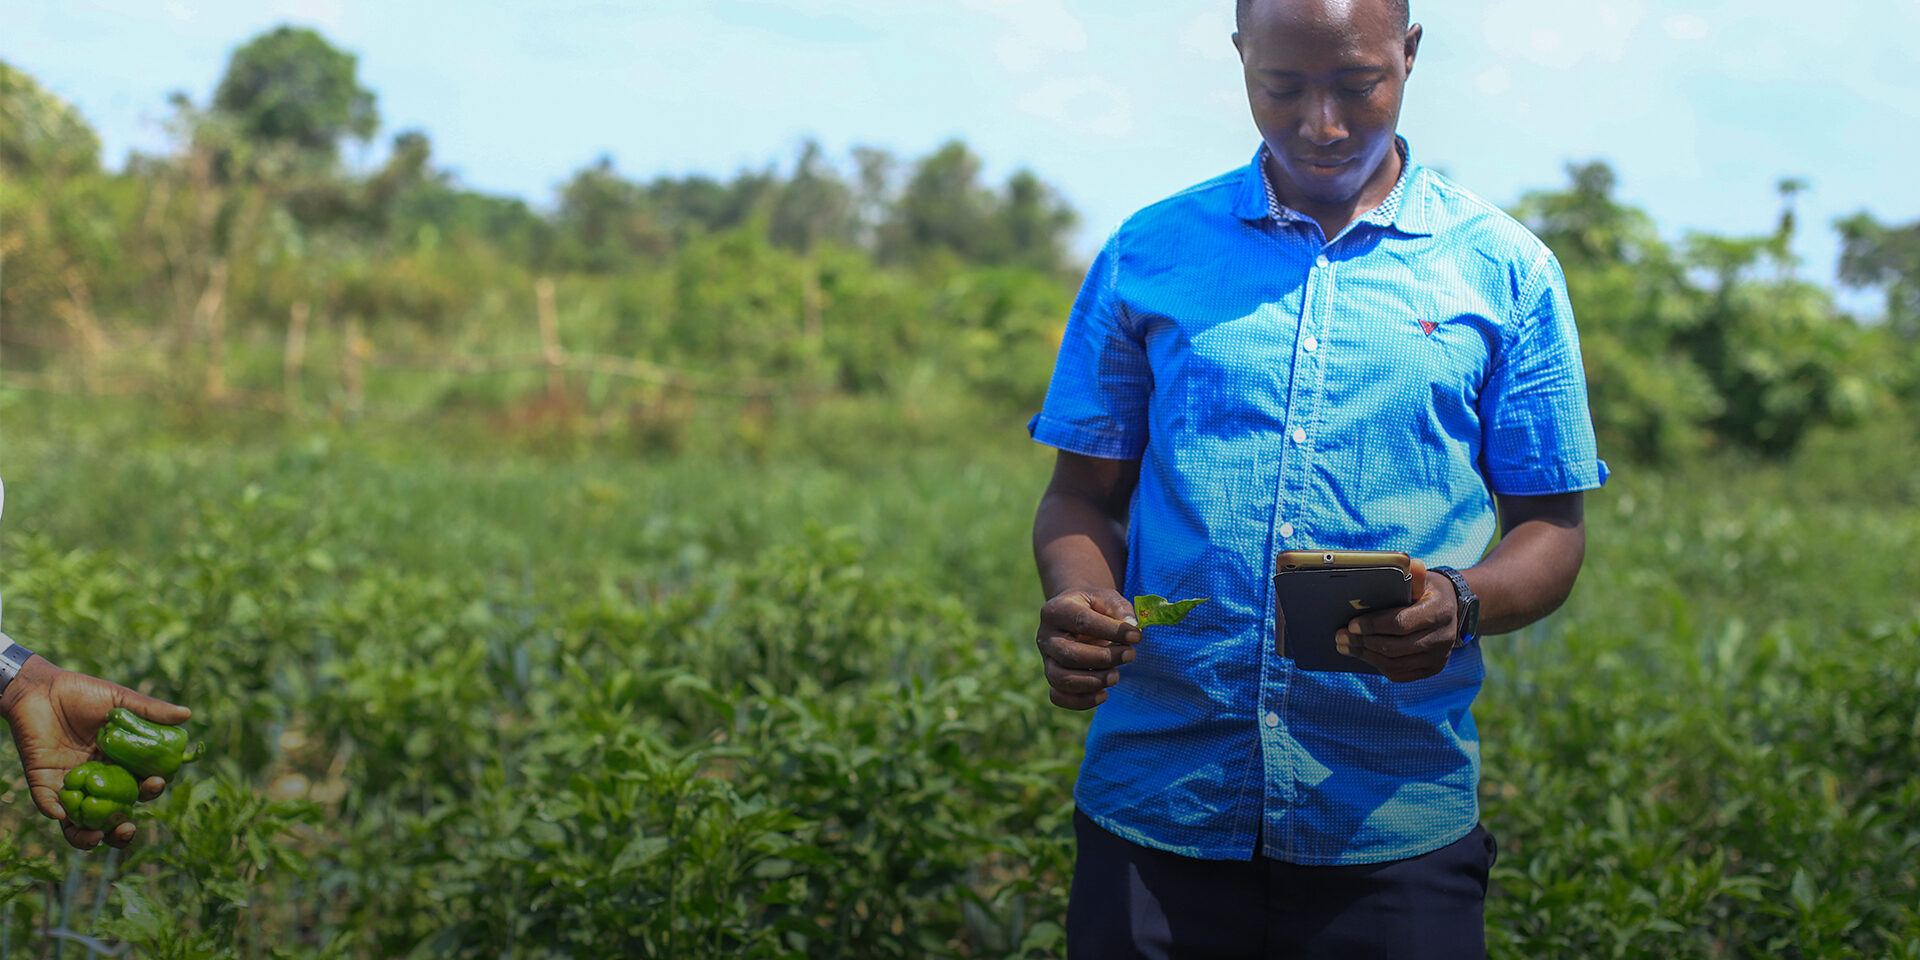 Man uses phone app while standing in vegetable garden.